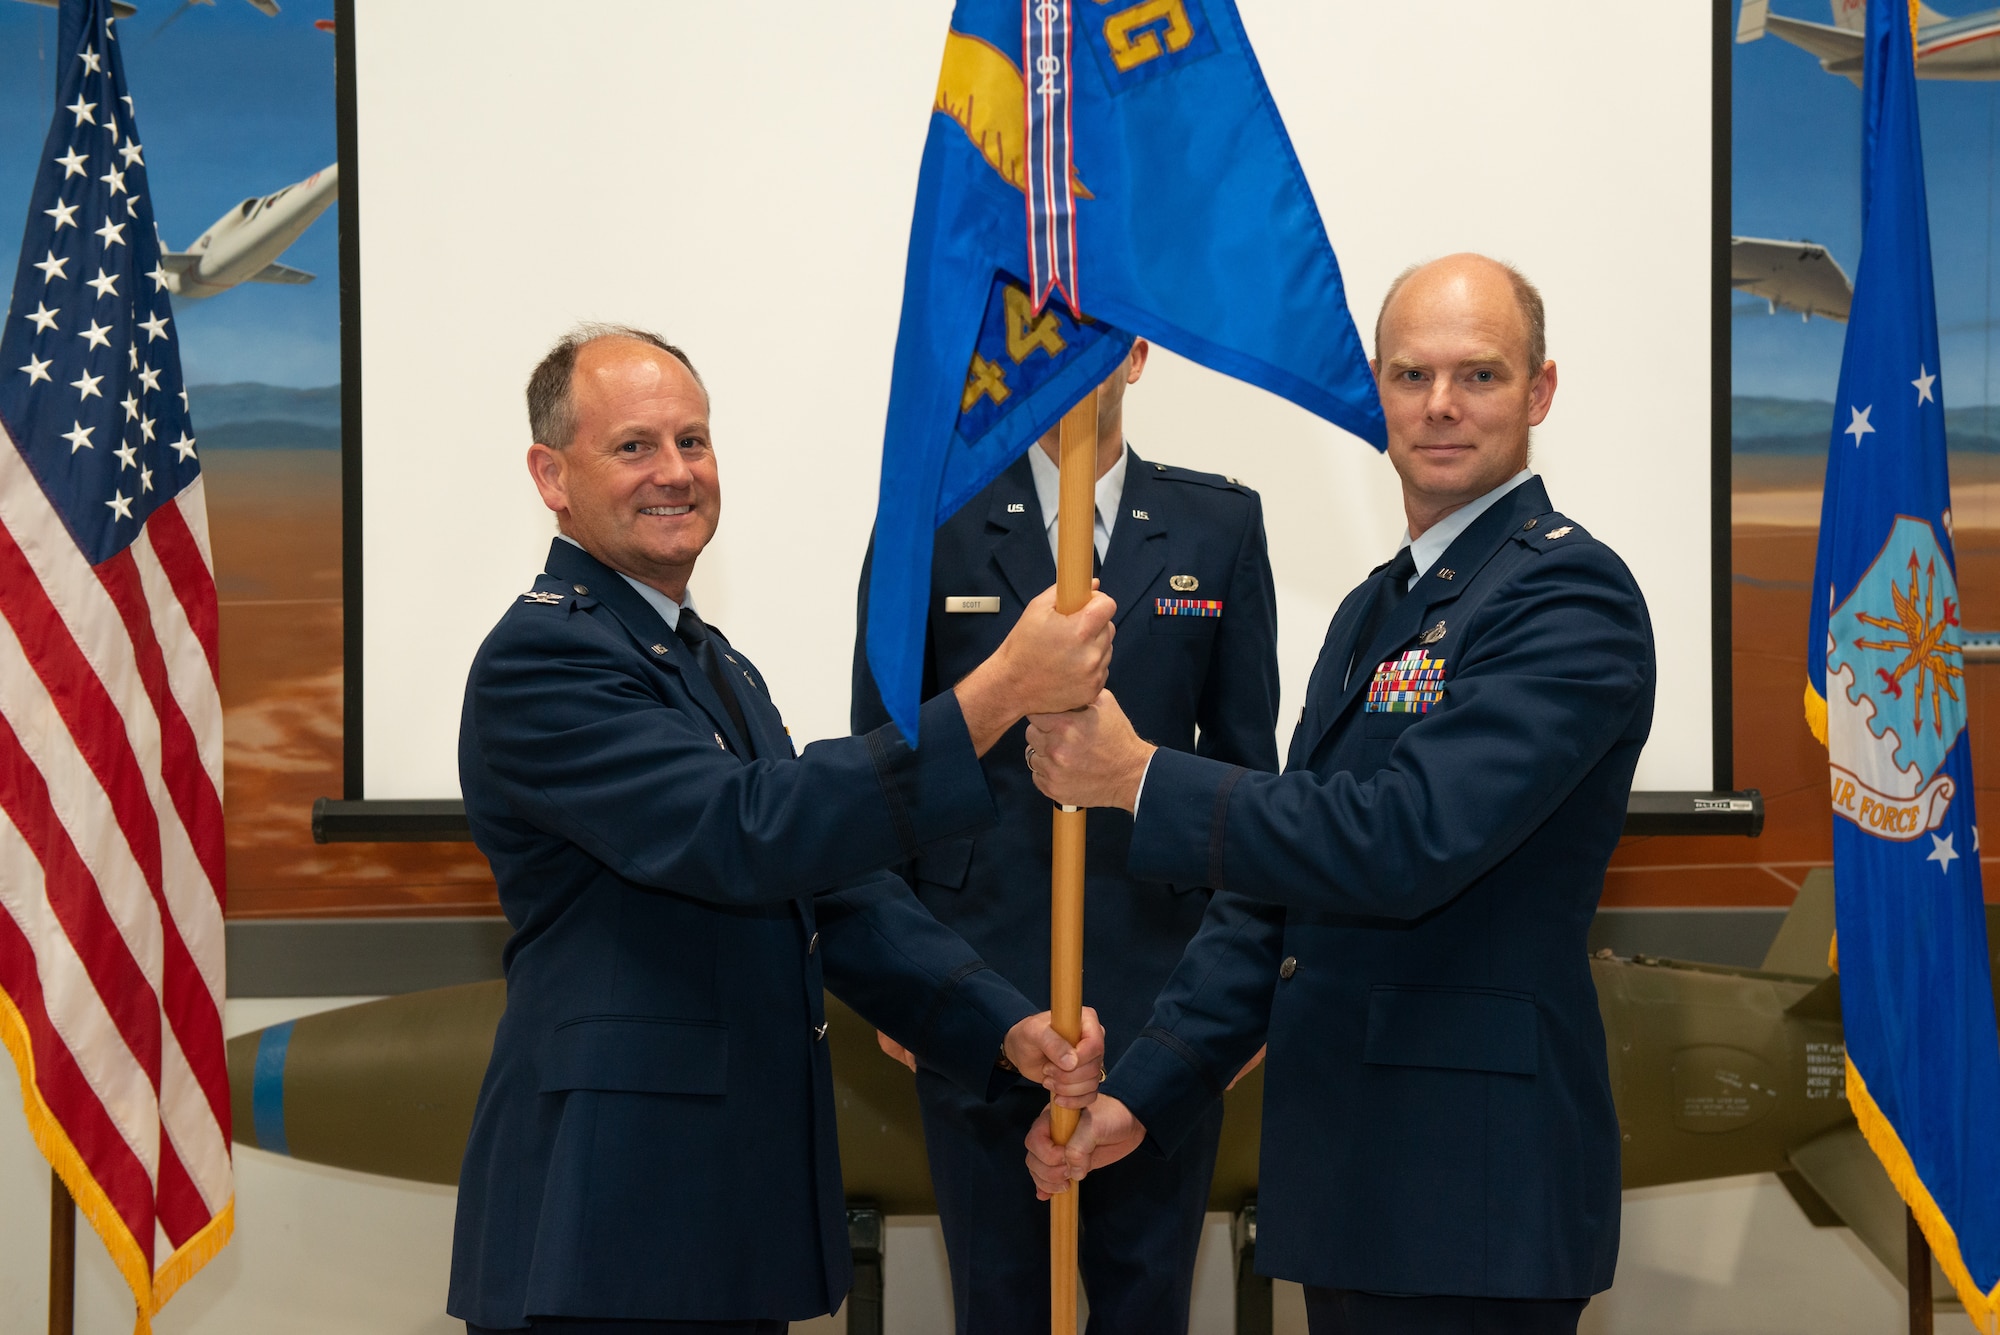 Col. Jay Orson, 412th Electronic Warfare Group Commander, hands over the newly-reactivated 445th Test Squadron’s guidon to its new commander, Lt. Col. James Petersen, during a reactivation and assumption of command ceremony on Edwards Air Force Base, California, June 29. (Air Force photo by Madeline Guadarrama)